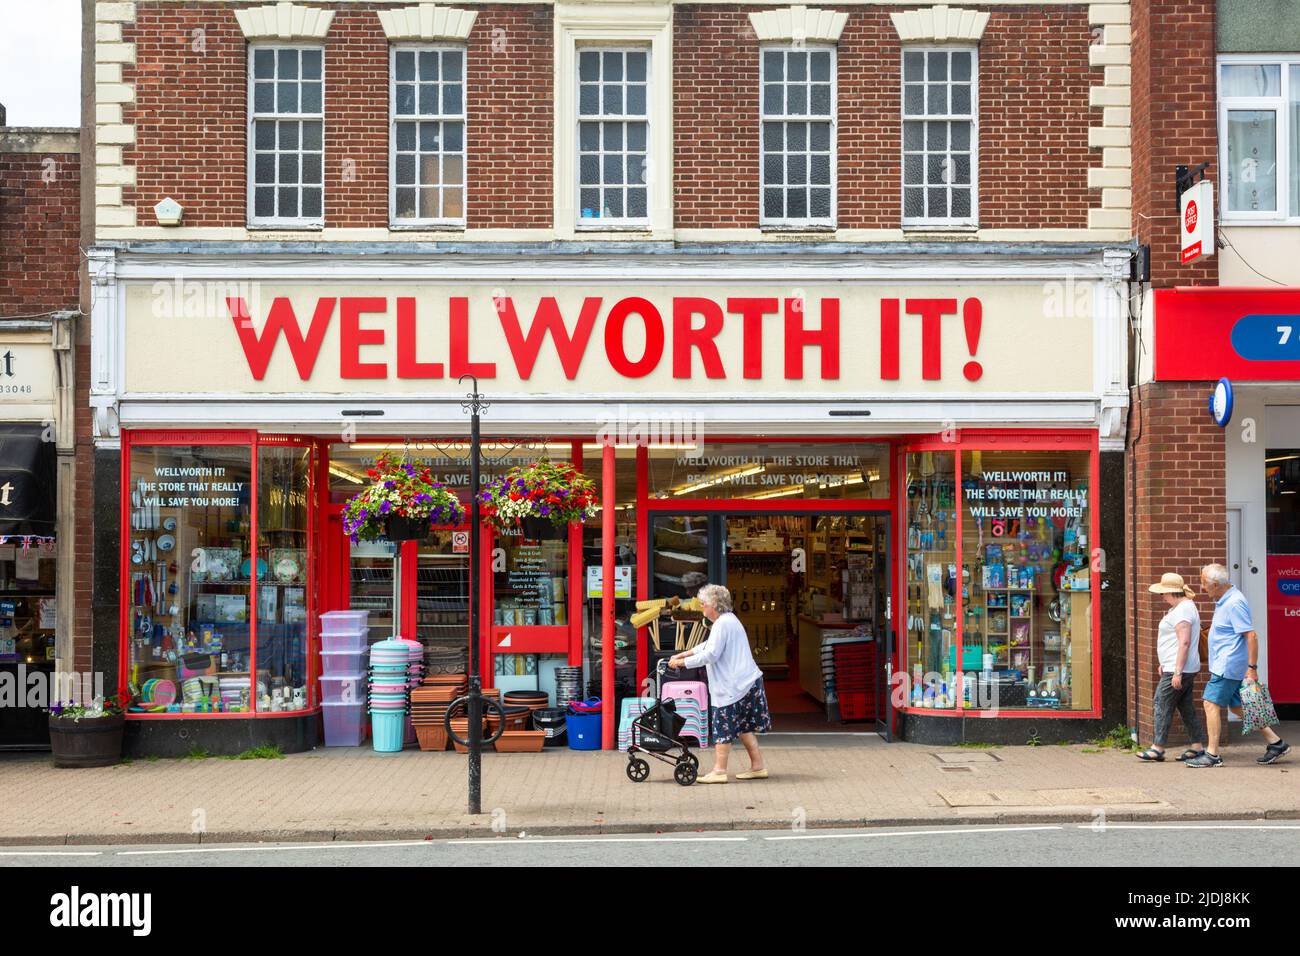 Wellworth IT! A shop in Ledbury, Herefordshire, UK, 2022, that mimics the now defunct Woolworths store. Stock Photo